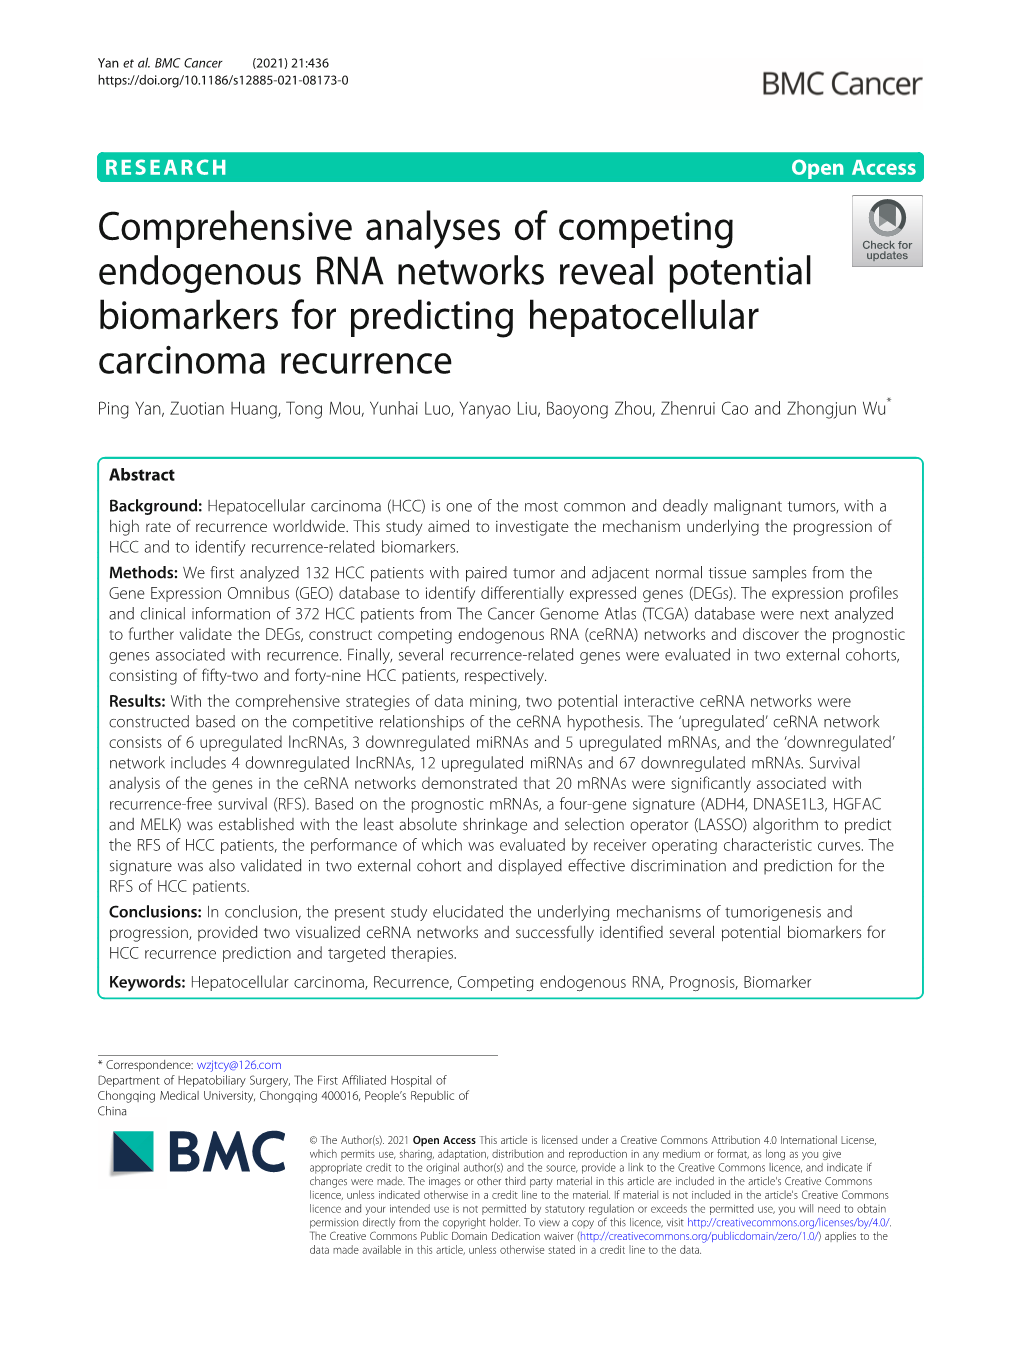 Comprehensive Analyses of Competing Endogenous RNA Networks Reveal Potential Biomarkers for Predicting Hepatocellular Carcinoma